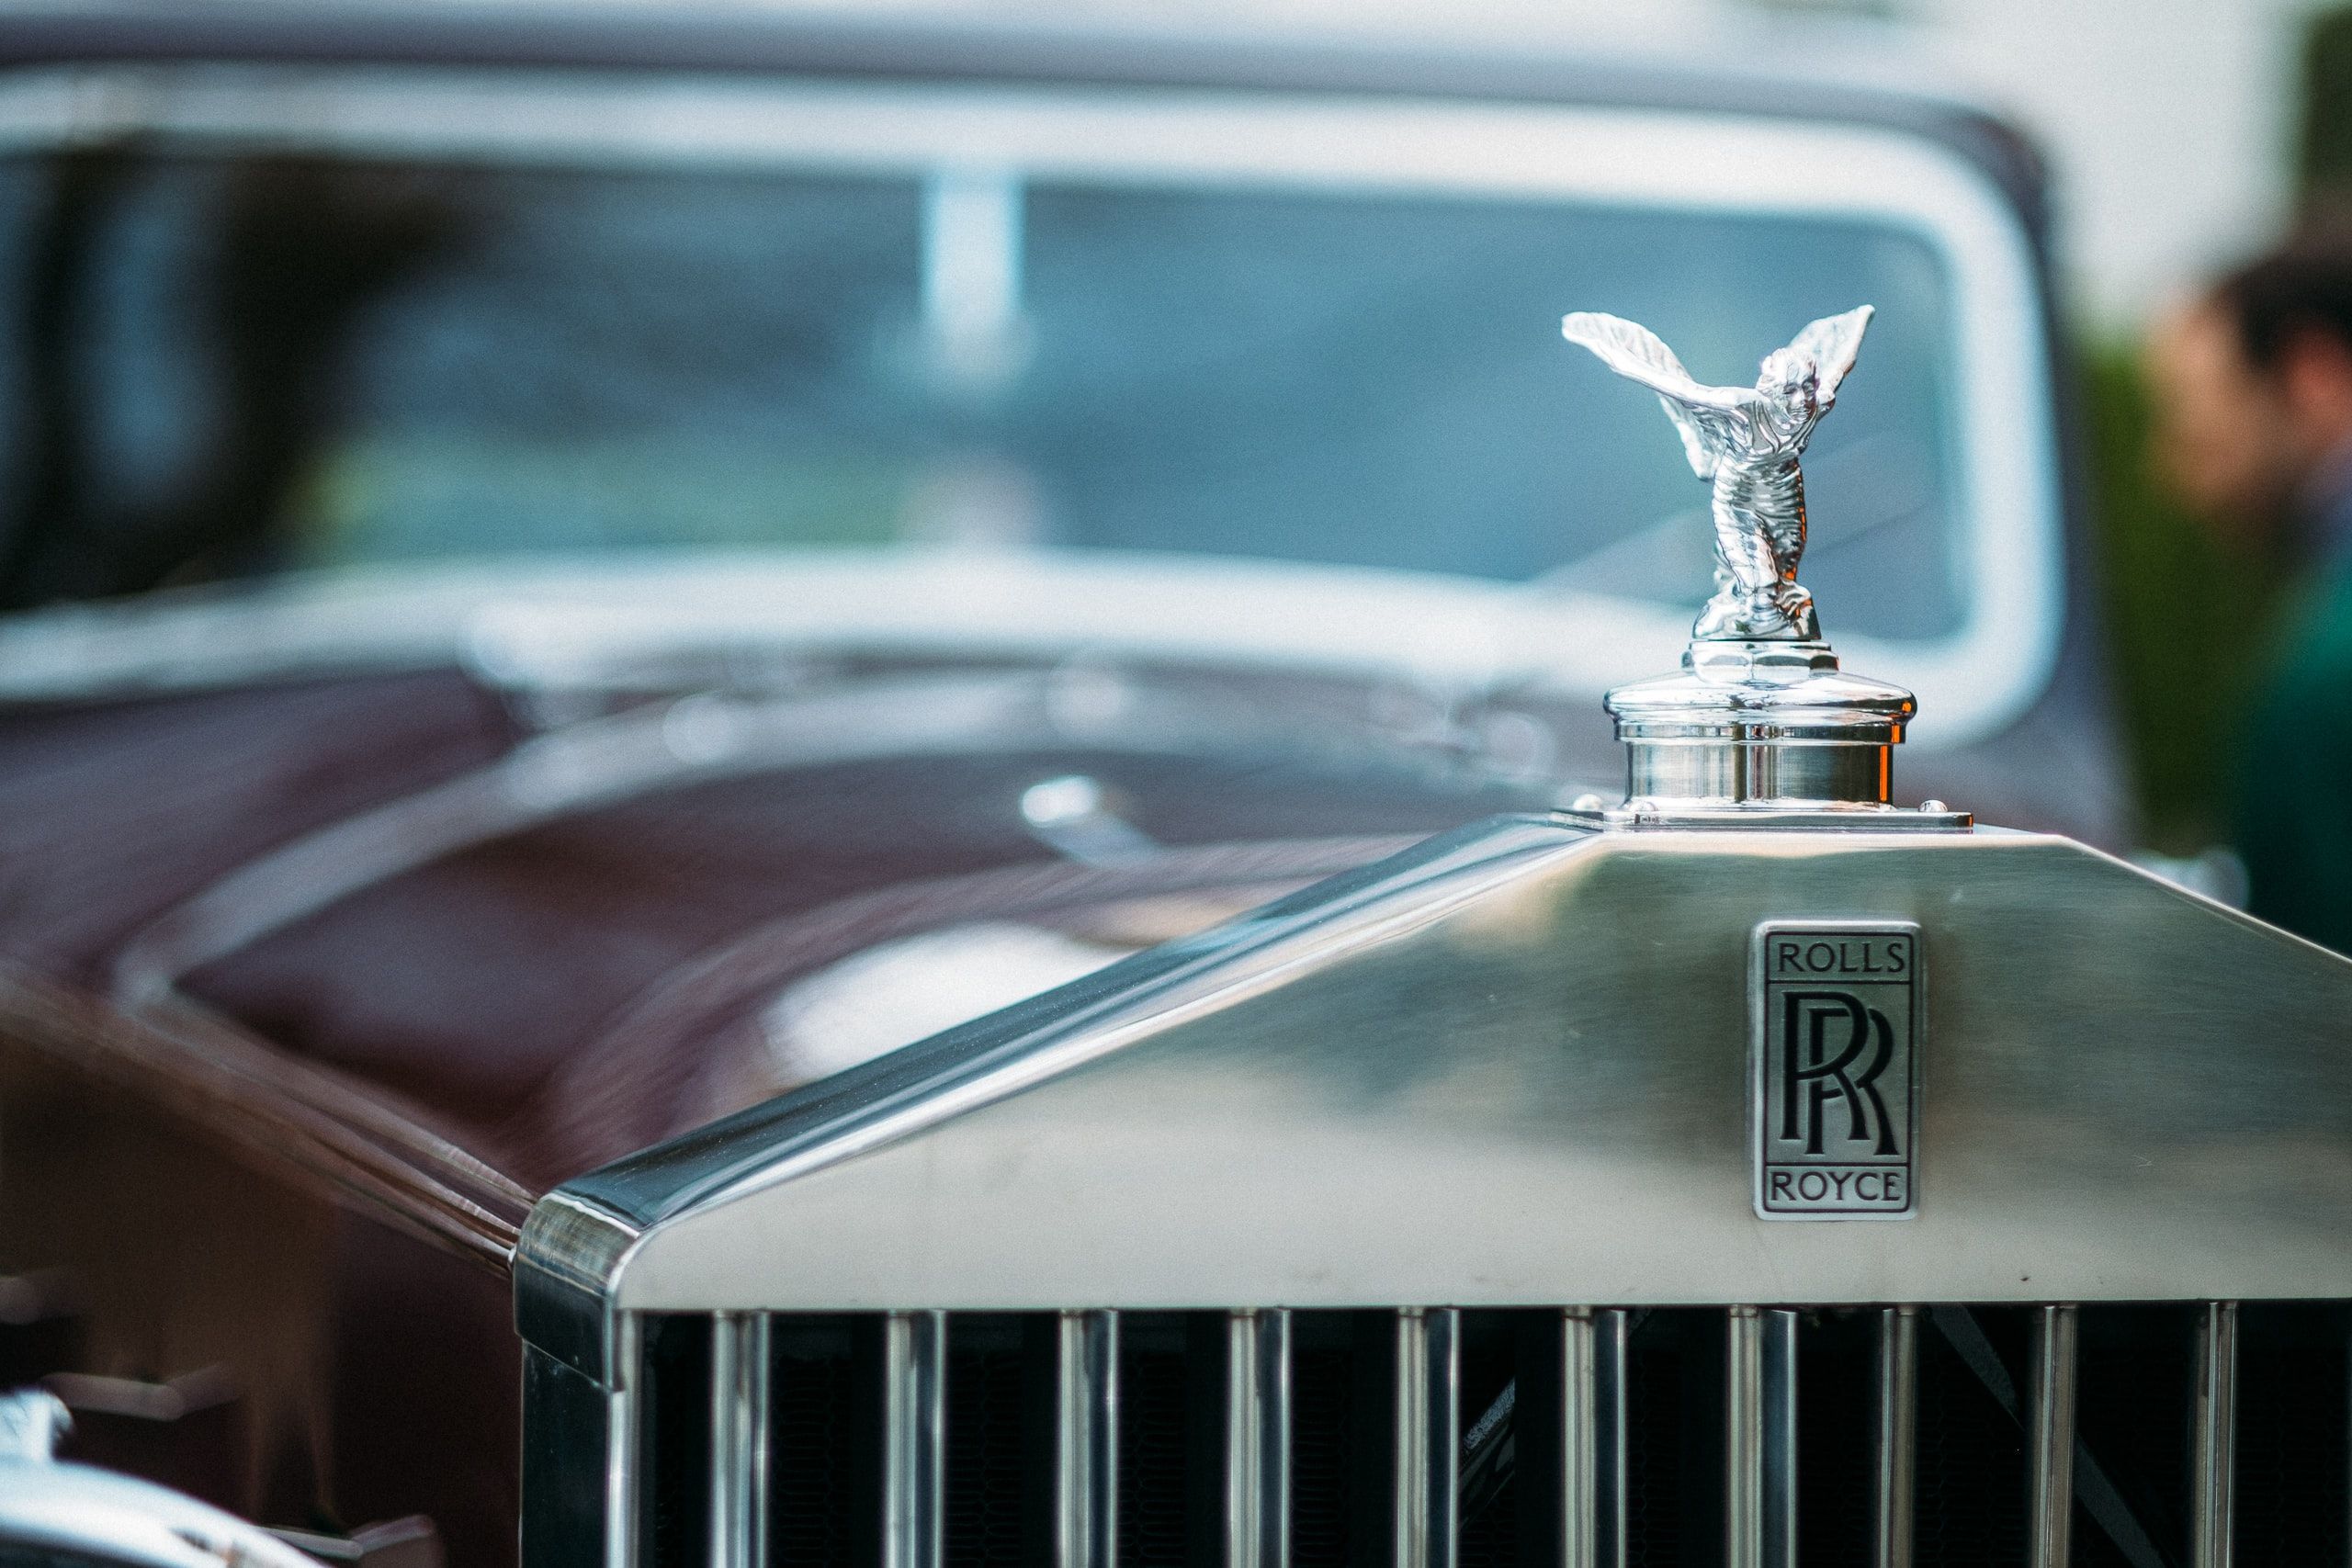 Rolls Royce to go fully electric by 2030, unveils first project ‘Spectre’